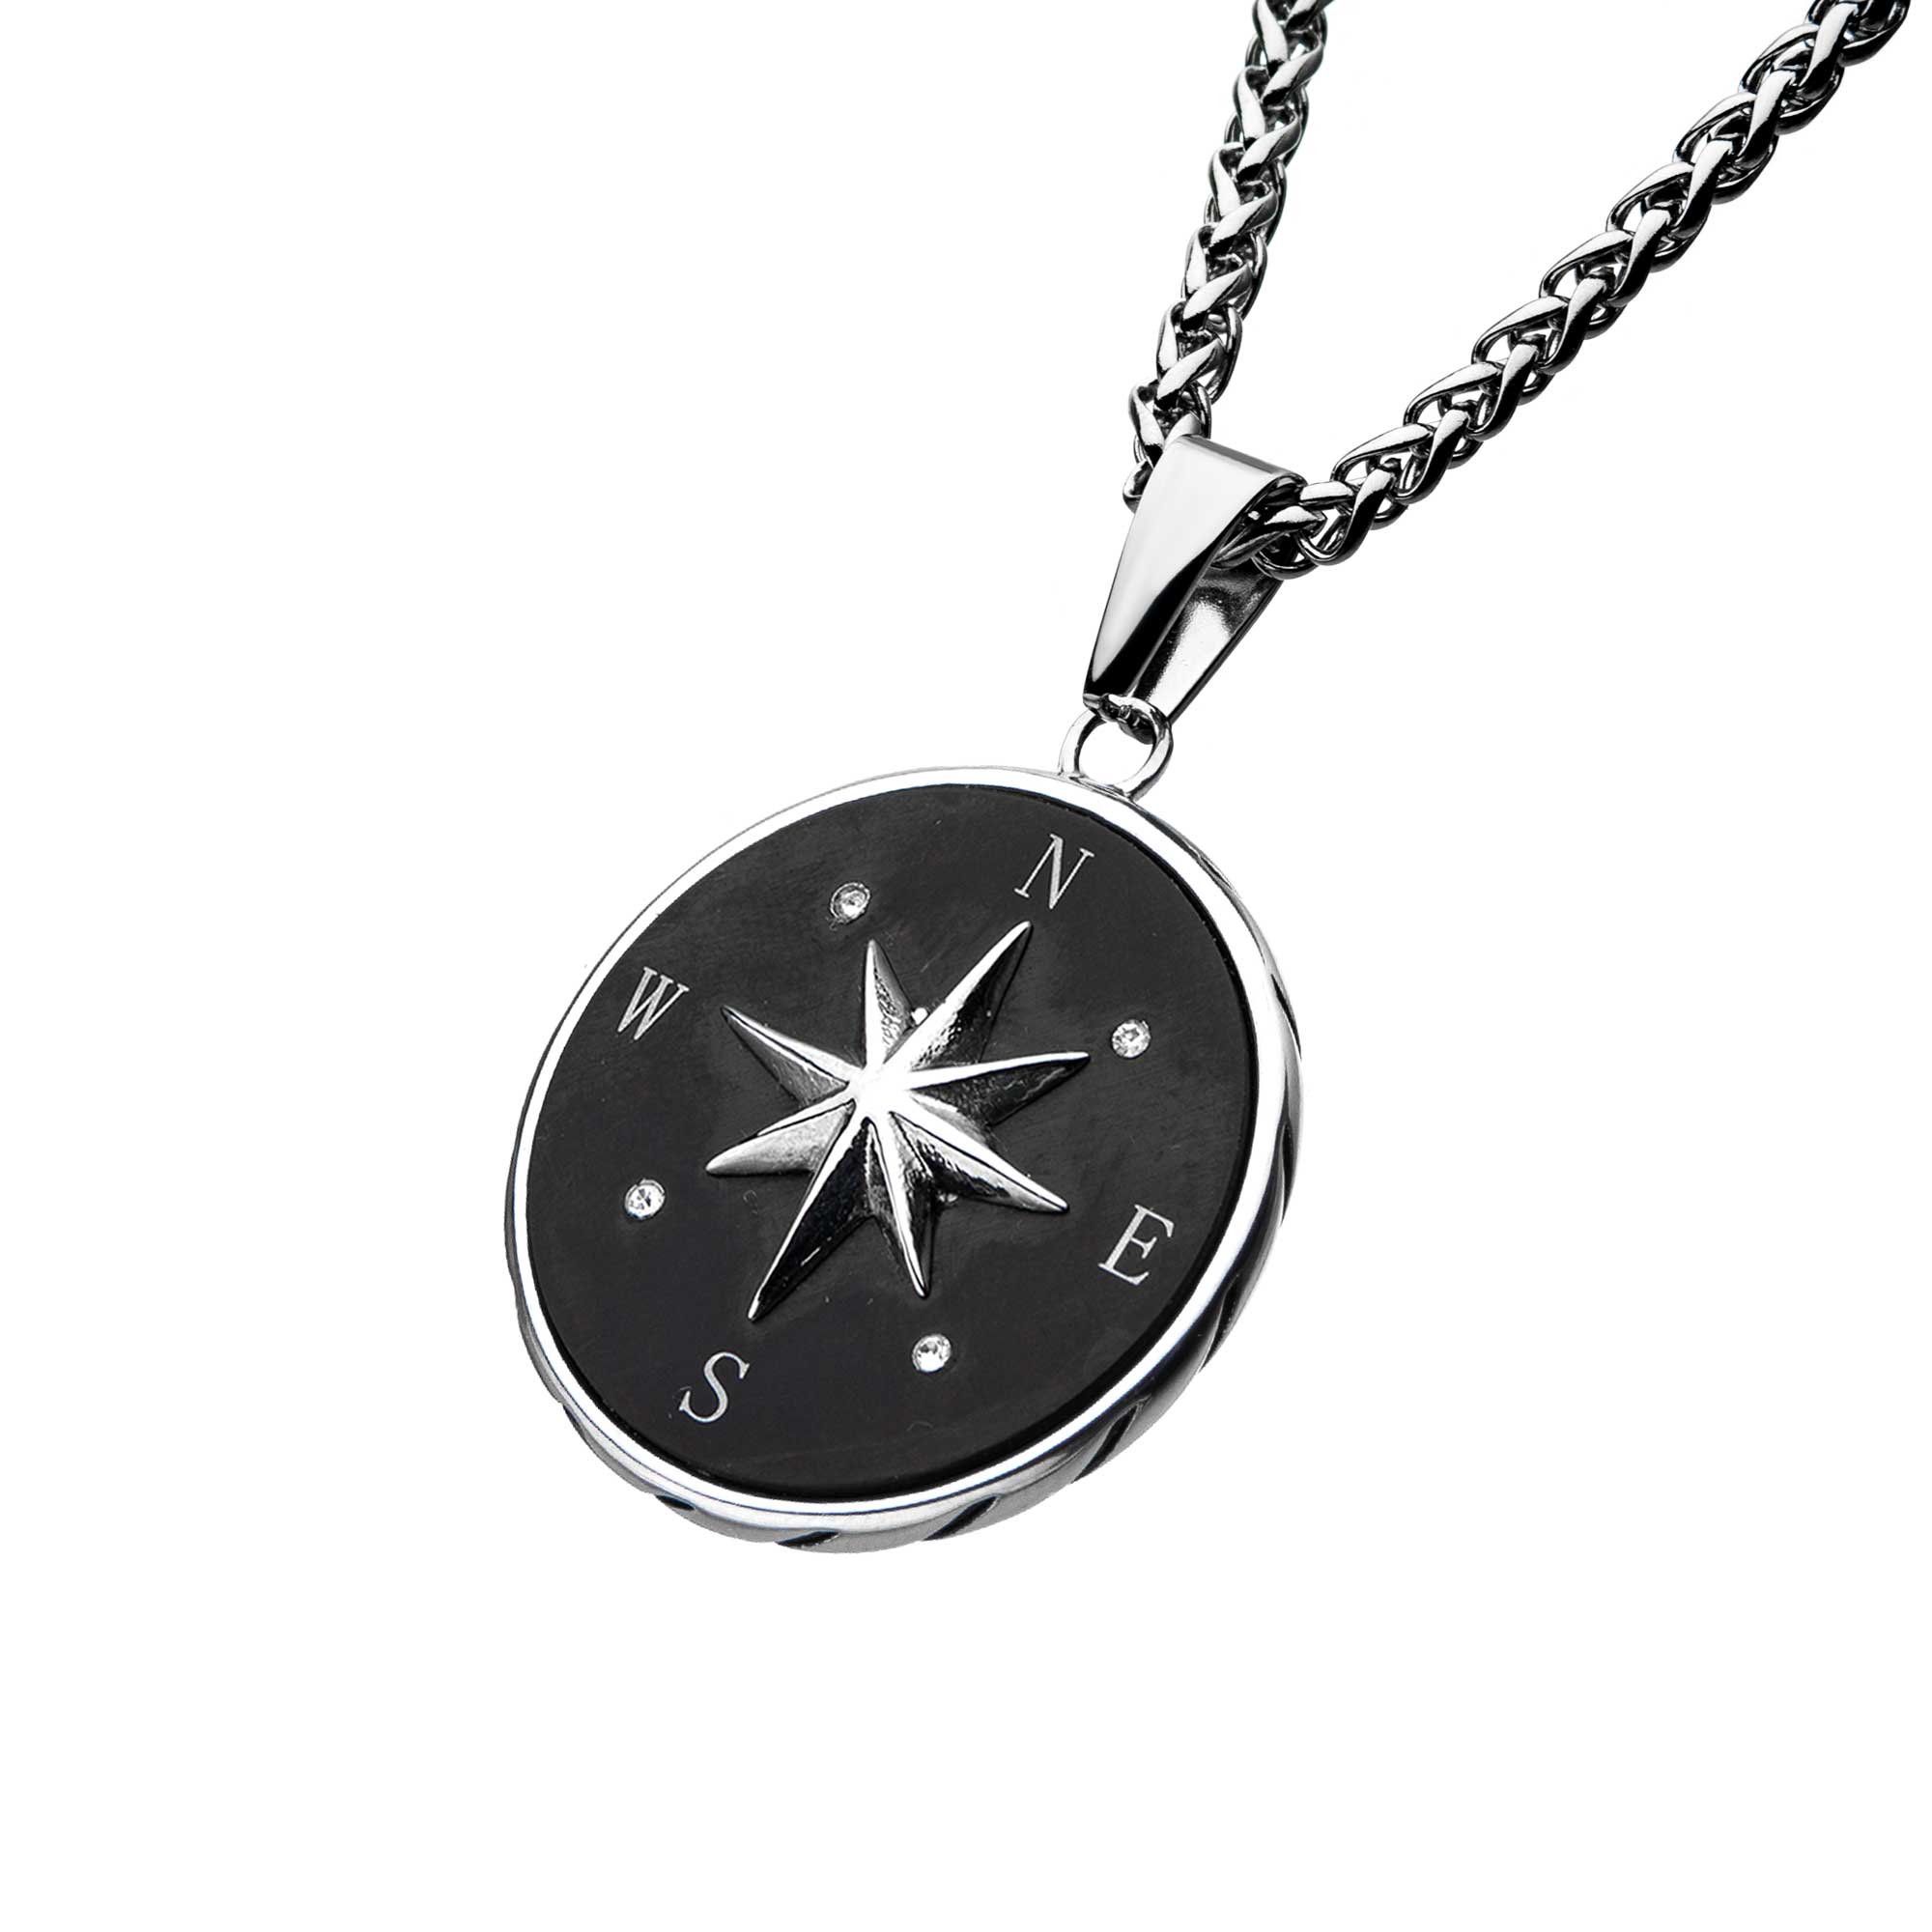 Stainless Steel and Black Plated Compass Pendant with Chain Image 2 Spath Jewelers Bartow, FL